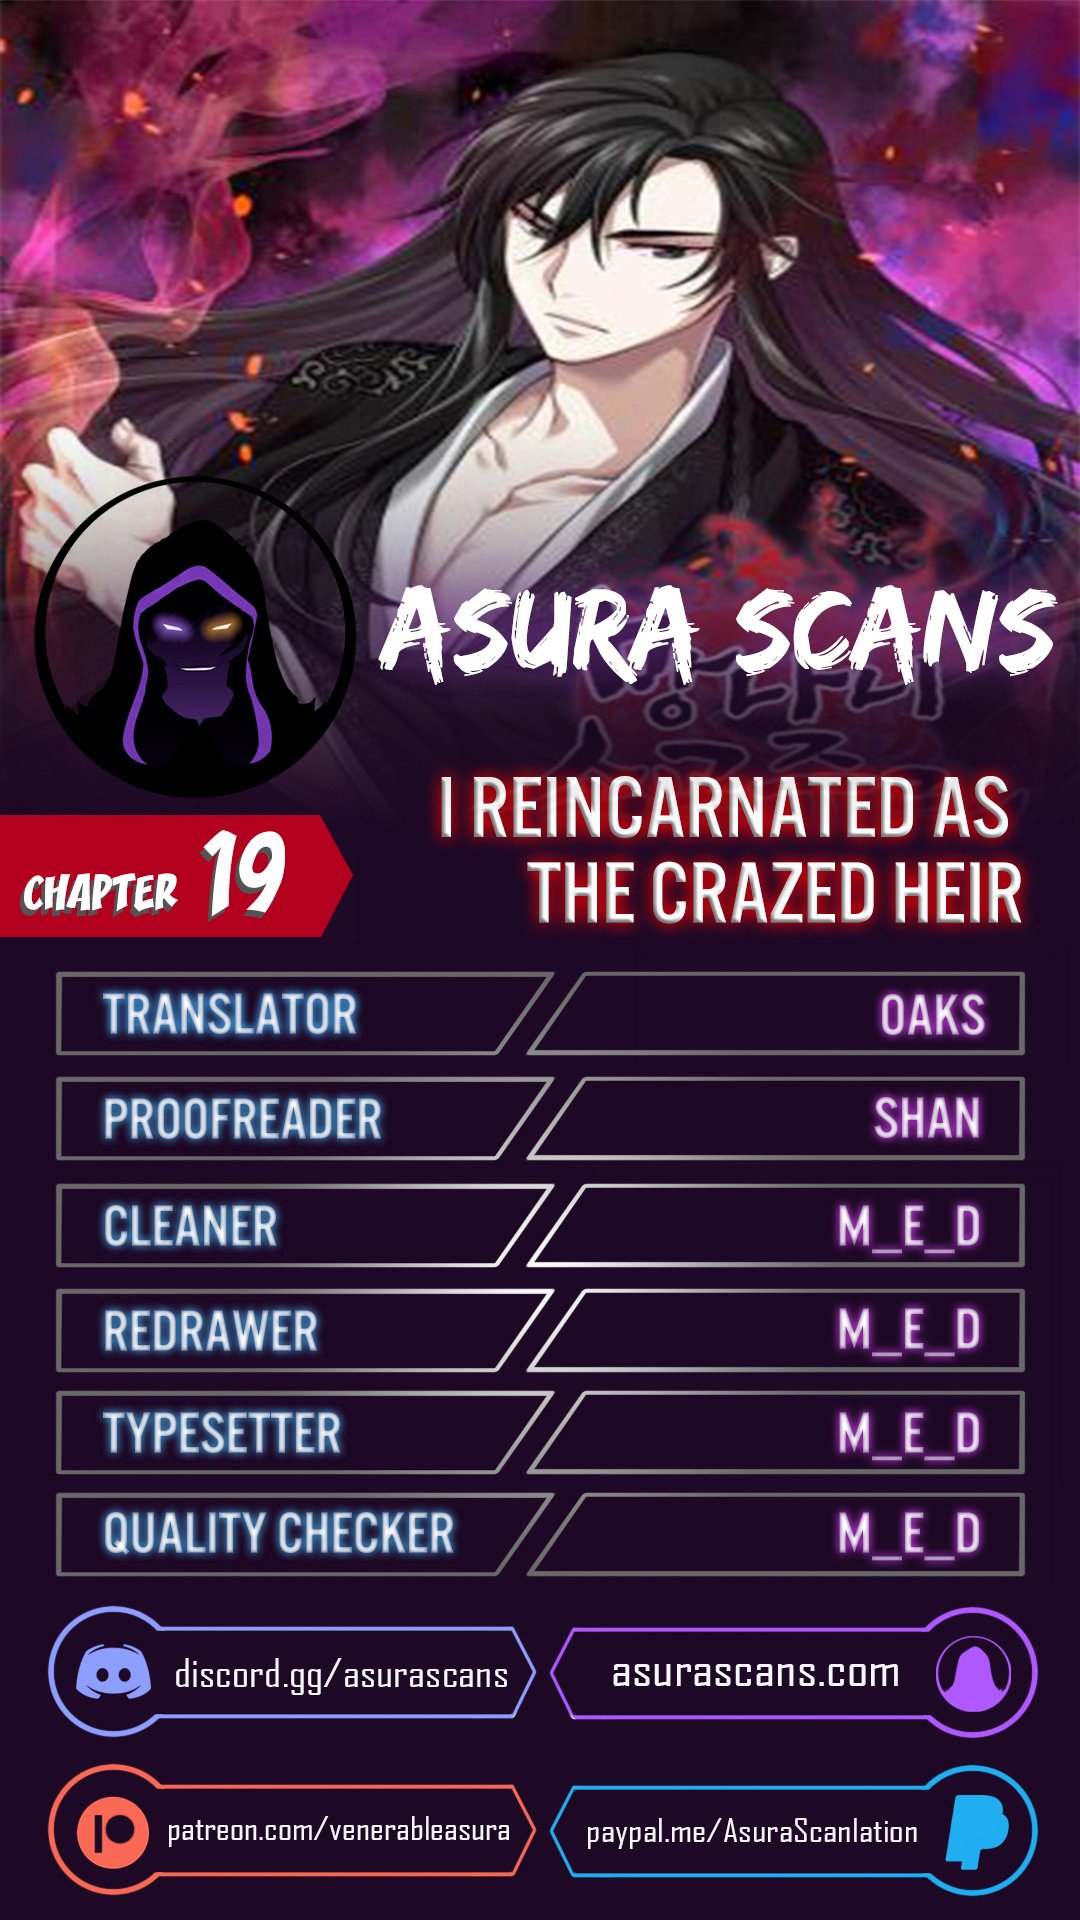 I Reincarnated As The Crazed Heir - Chapter 19268 - Image 1